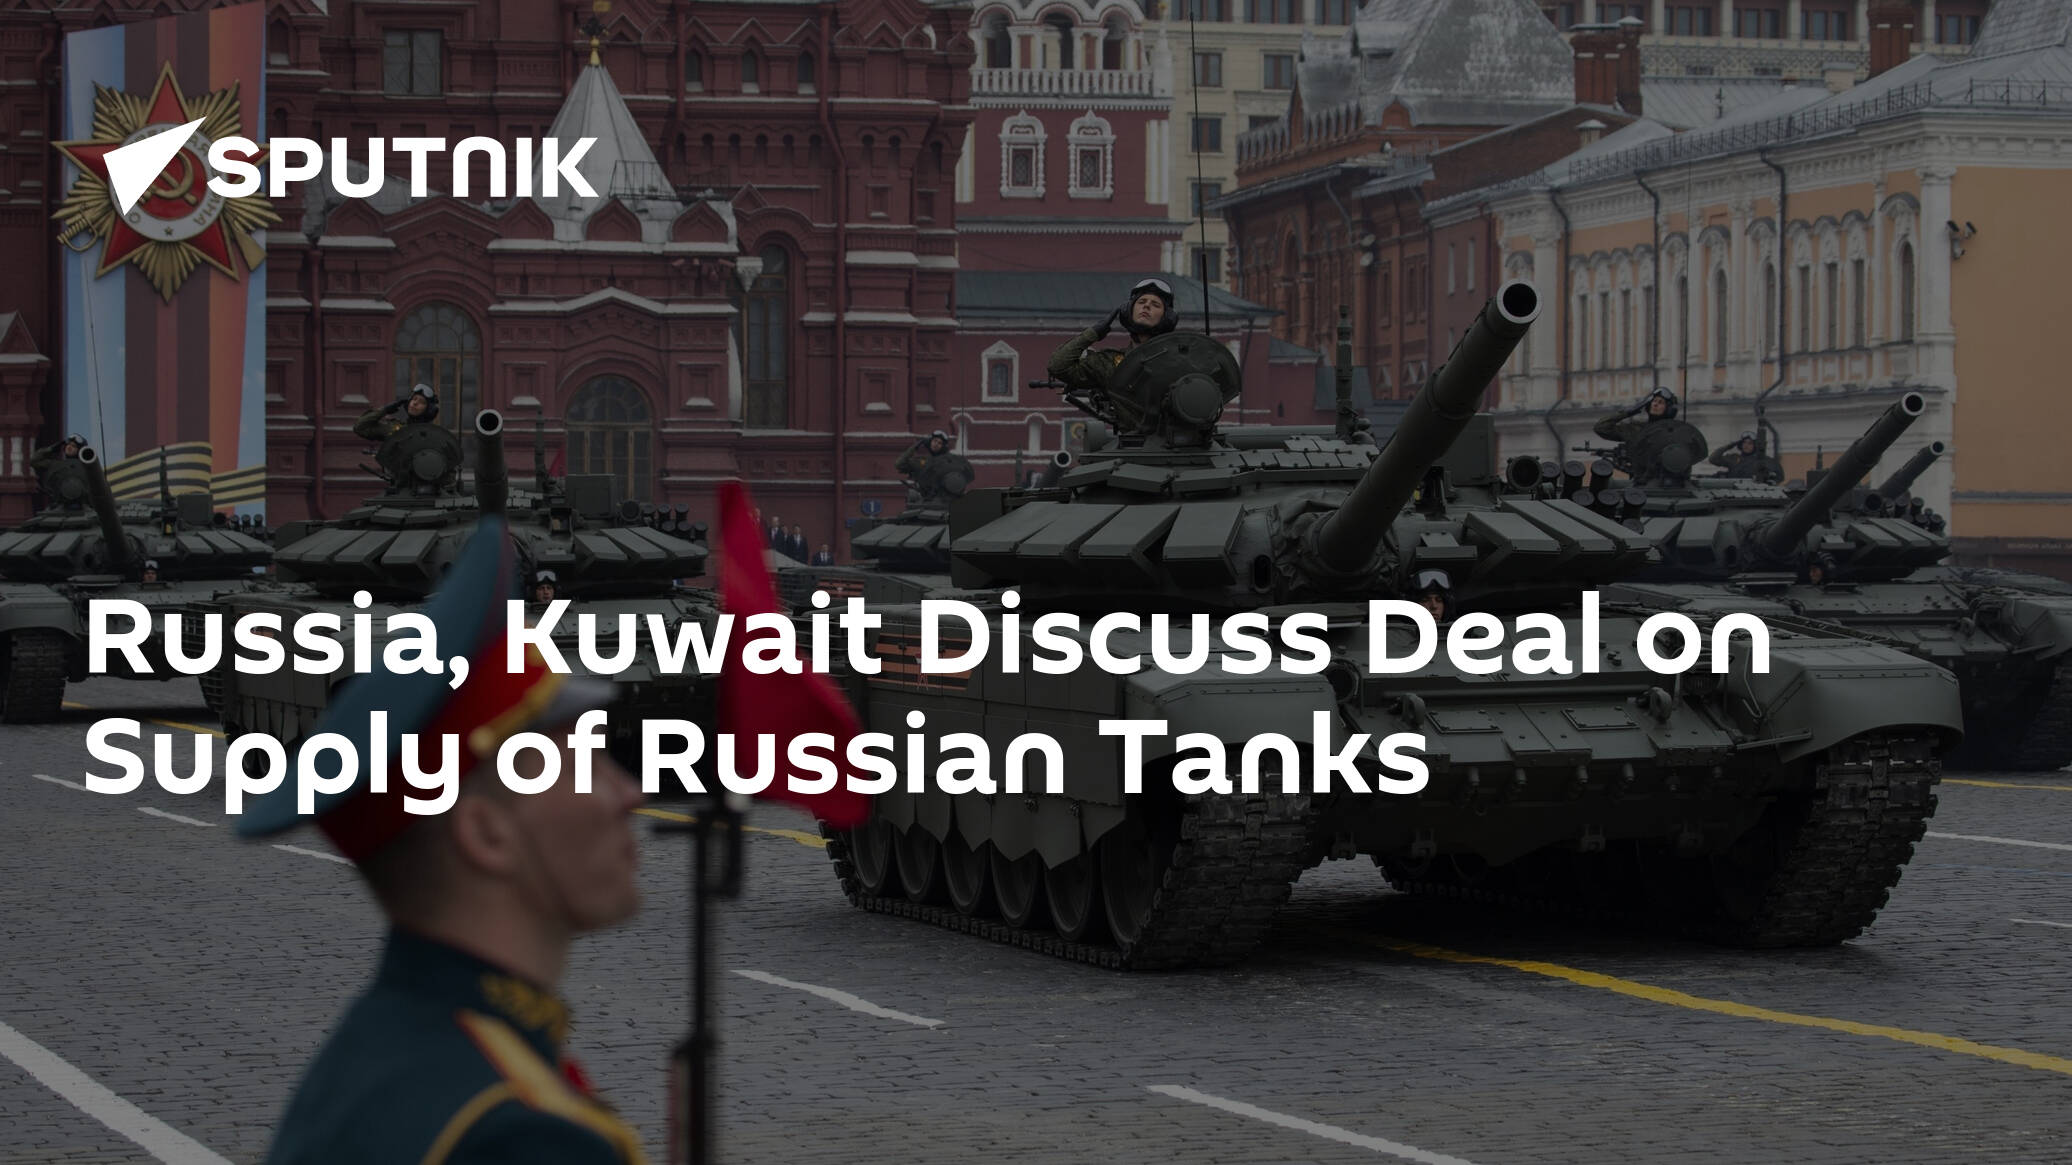 Russia, Kuwait Discuss Deal on Supply of Russian Tanks